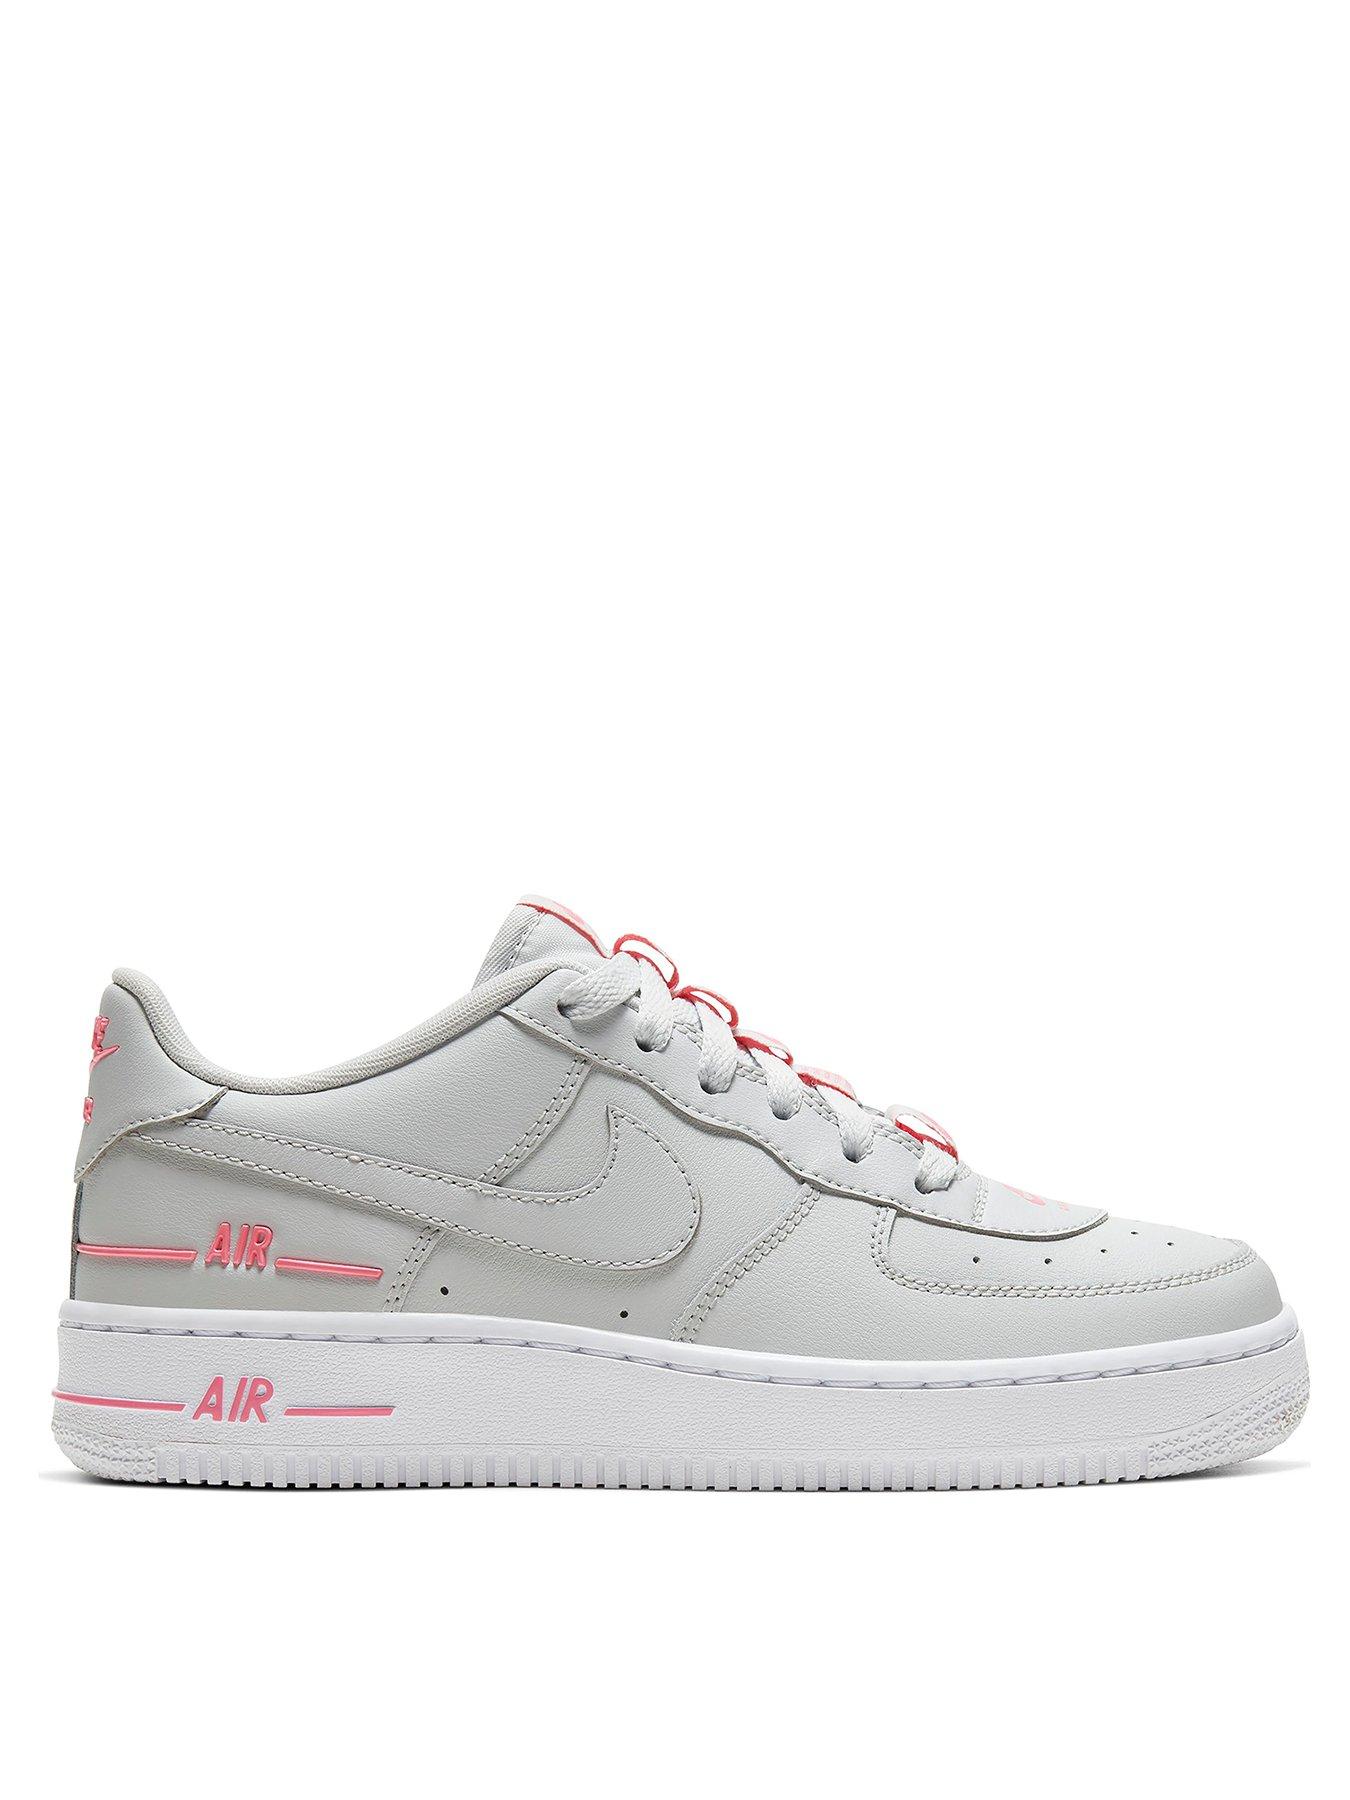 nike light grey air force 1 lv8 3 trainers junior